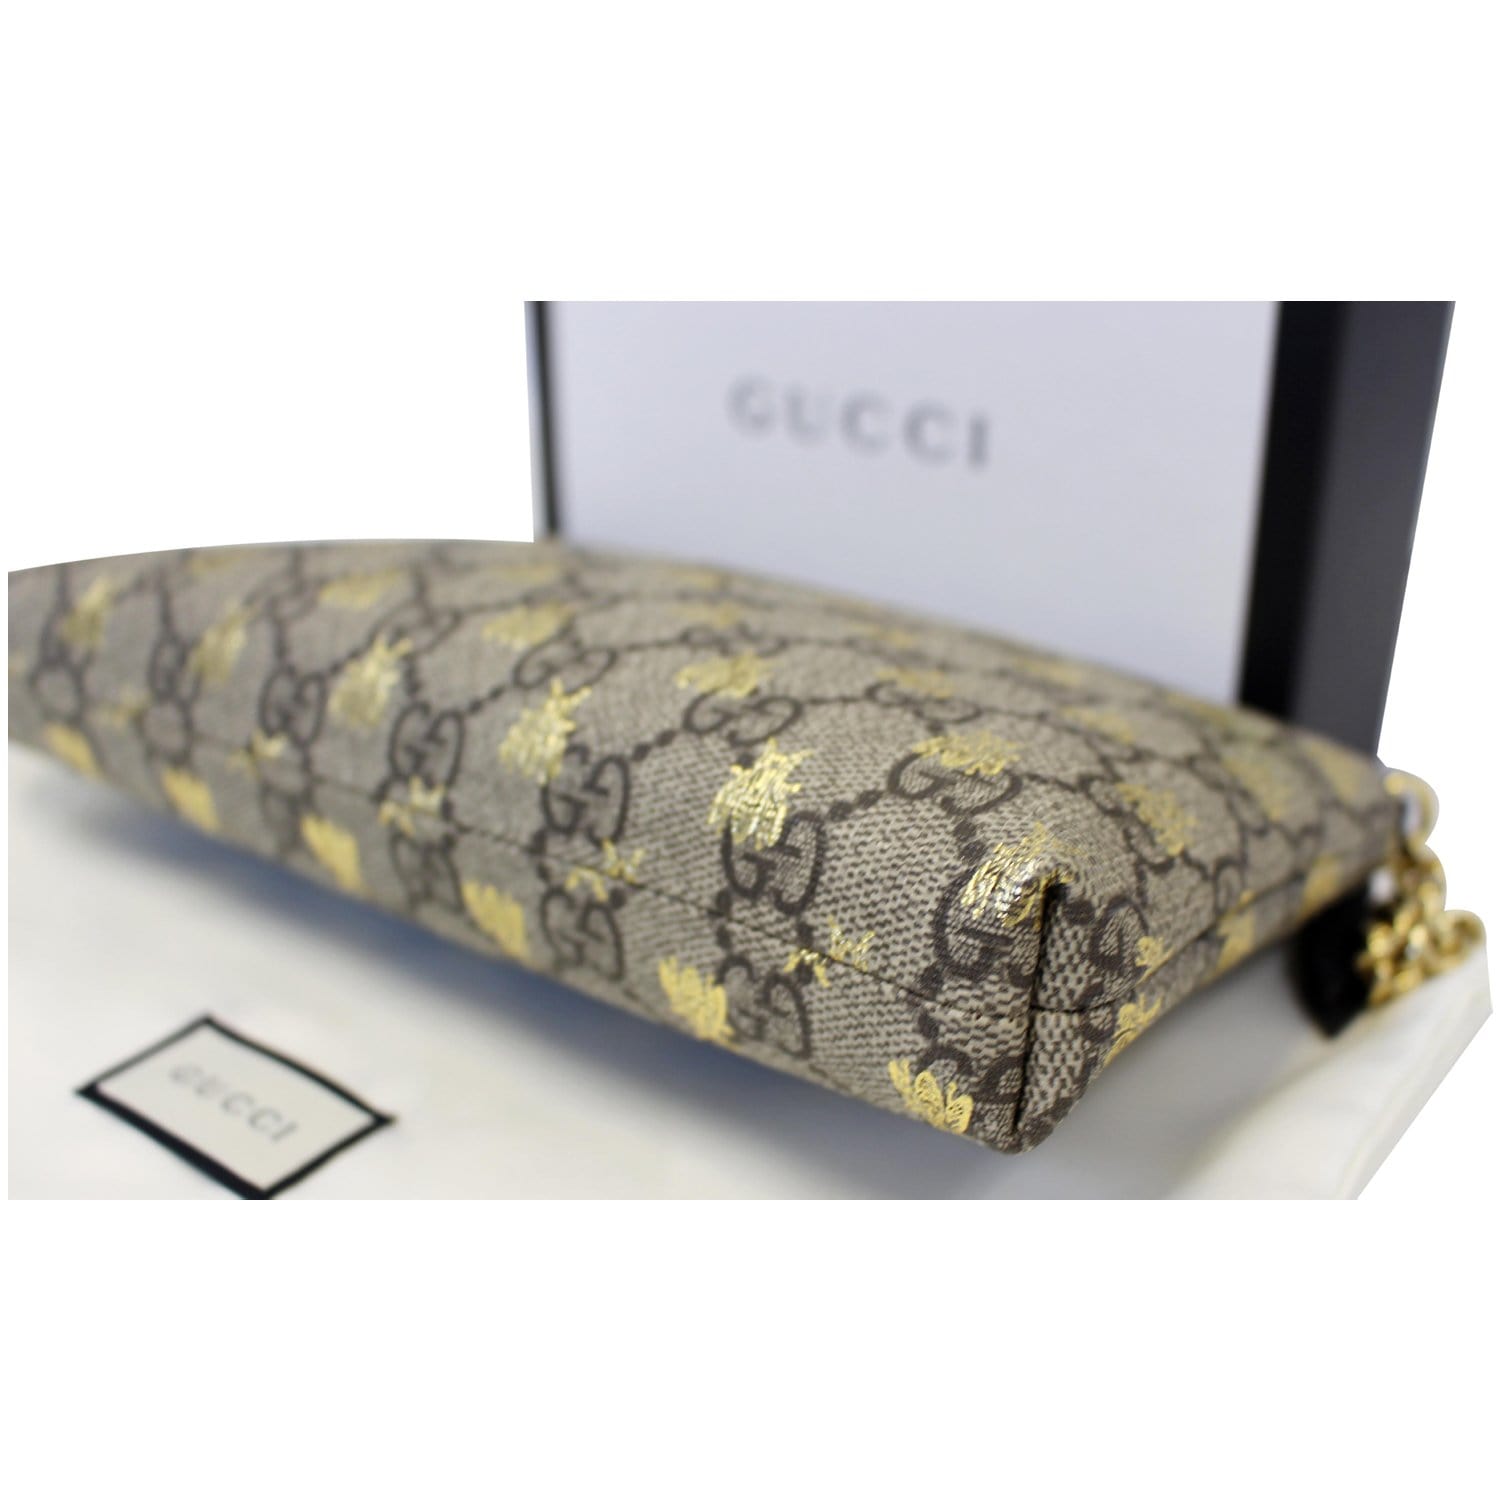 Gucci Wallet Bee - For Sale on 1stDibs  gucci supreme bee wallet, gucci bee  wristlet, wallet with bee logo